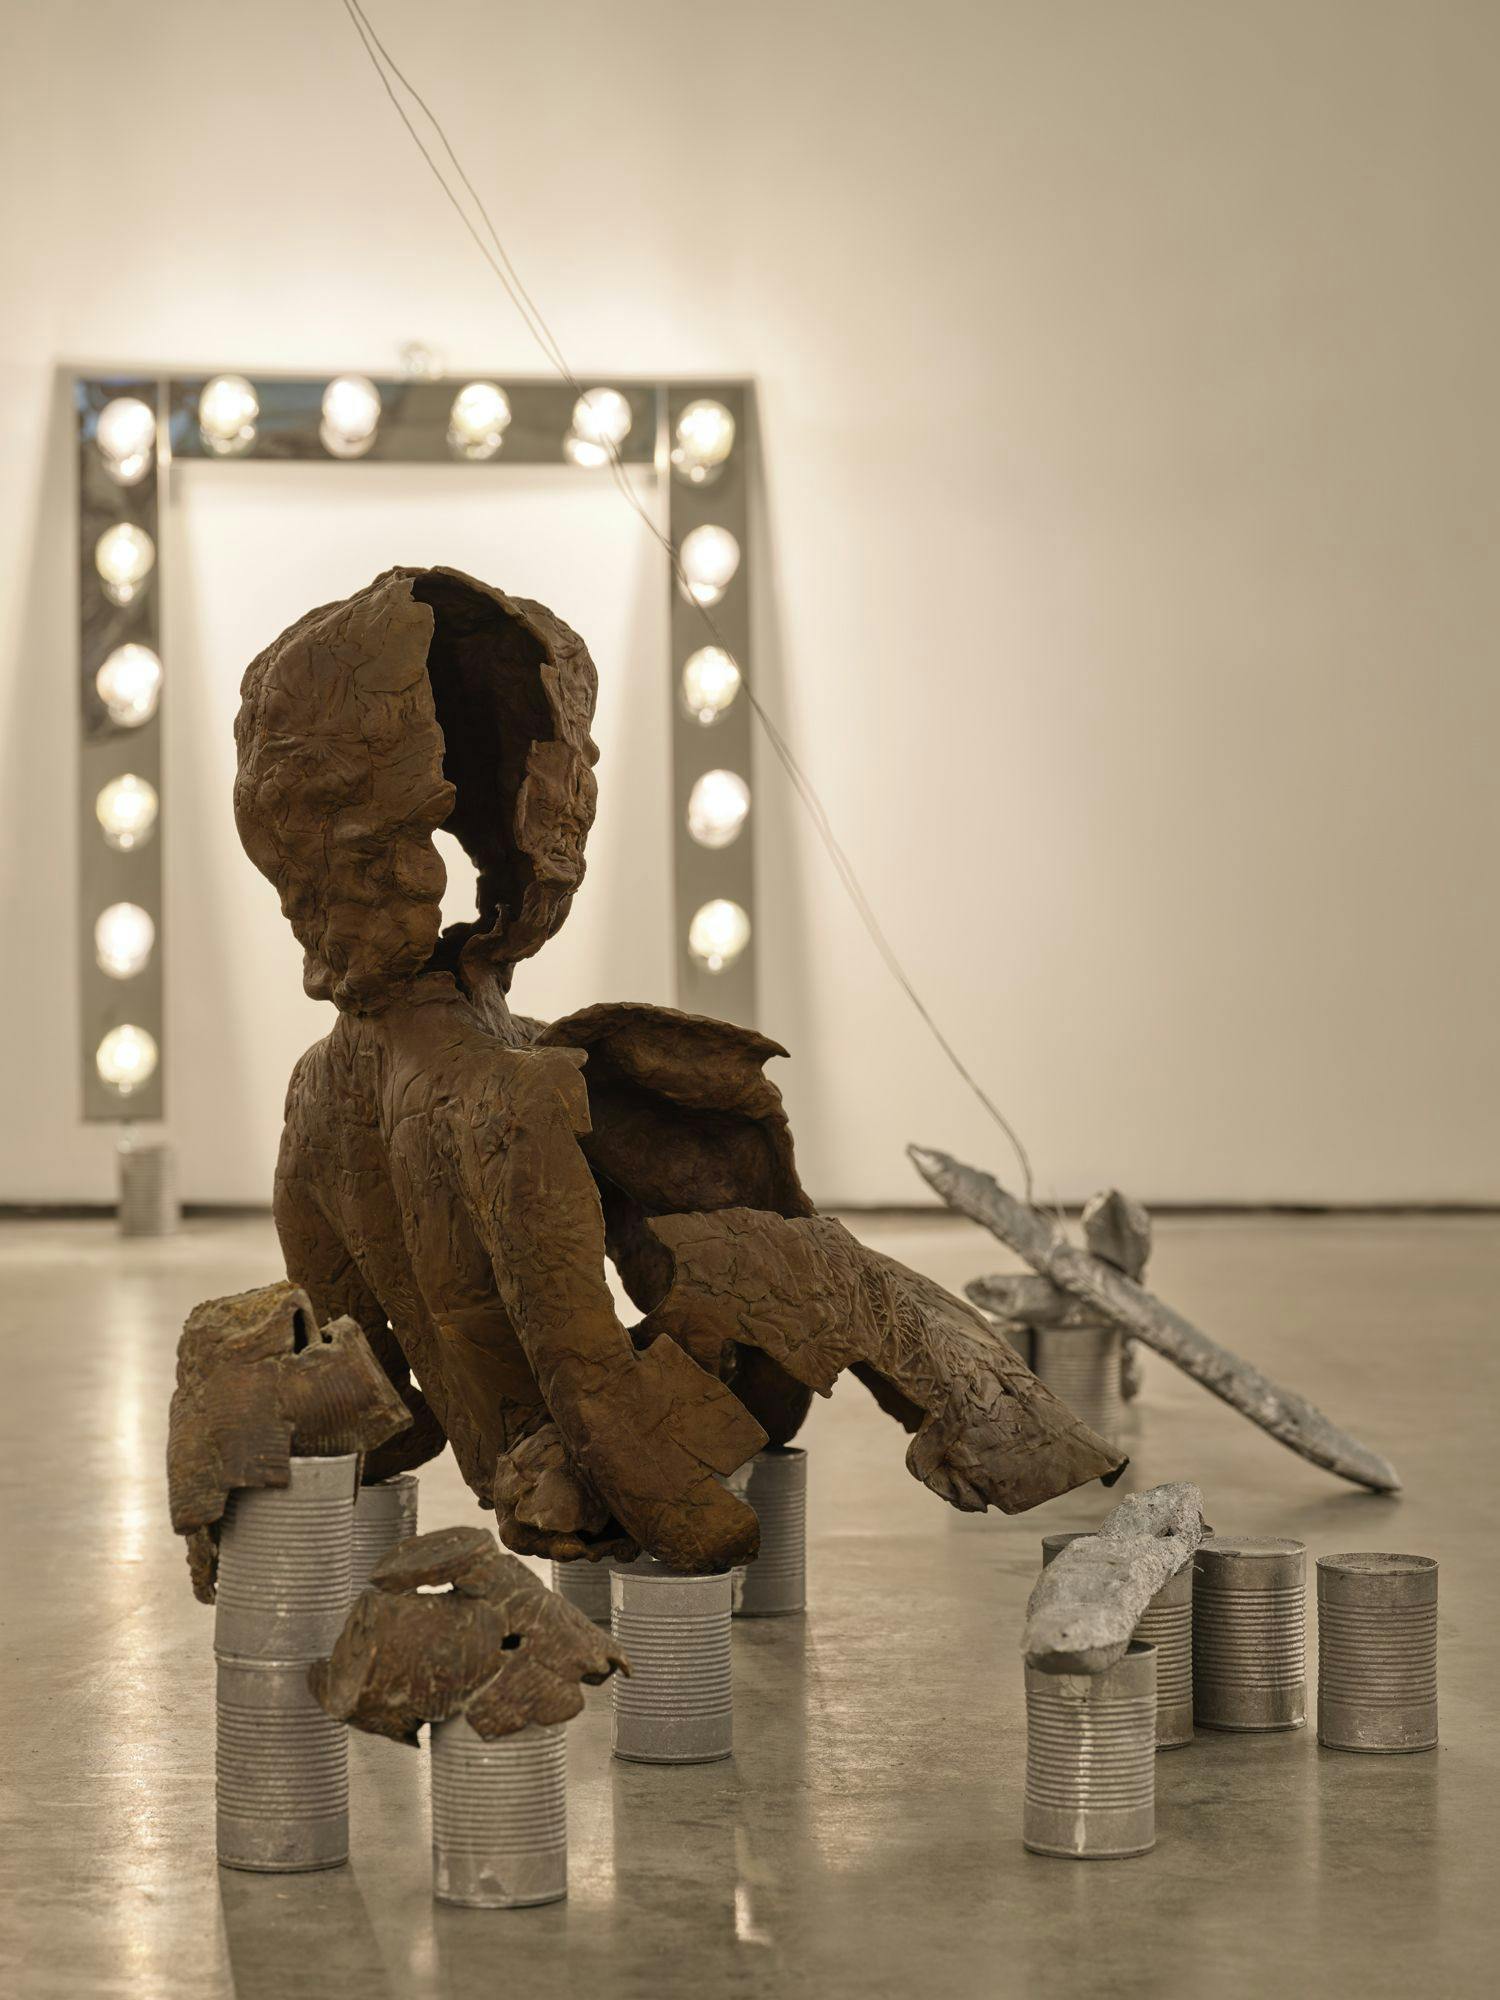 A bronze sculpture of a partial human figure sits on aluminum cans on a concrete floor. The sculpture's form appears to be precarious. Nearby are a vanity light, more aluminum cans, silver baguettes, and bronze cans that appear to be melting.